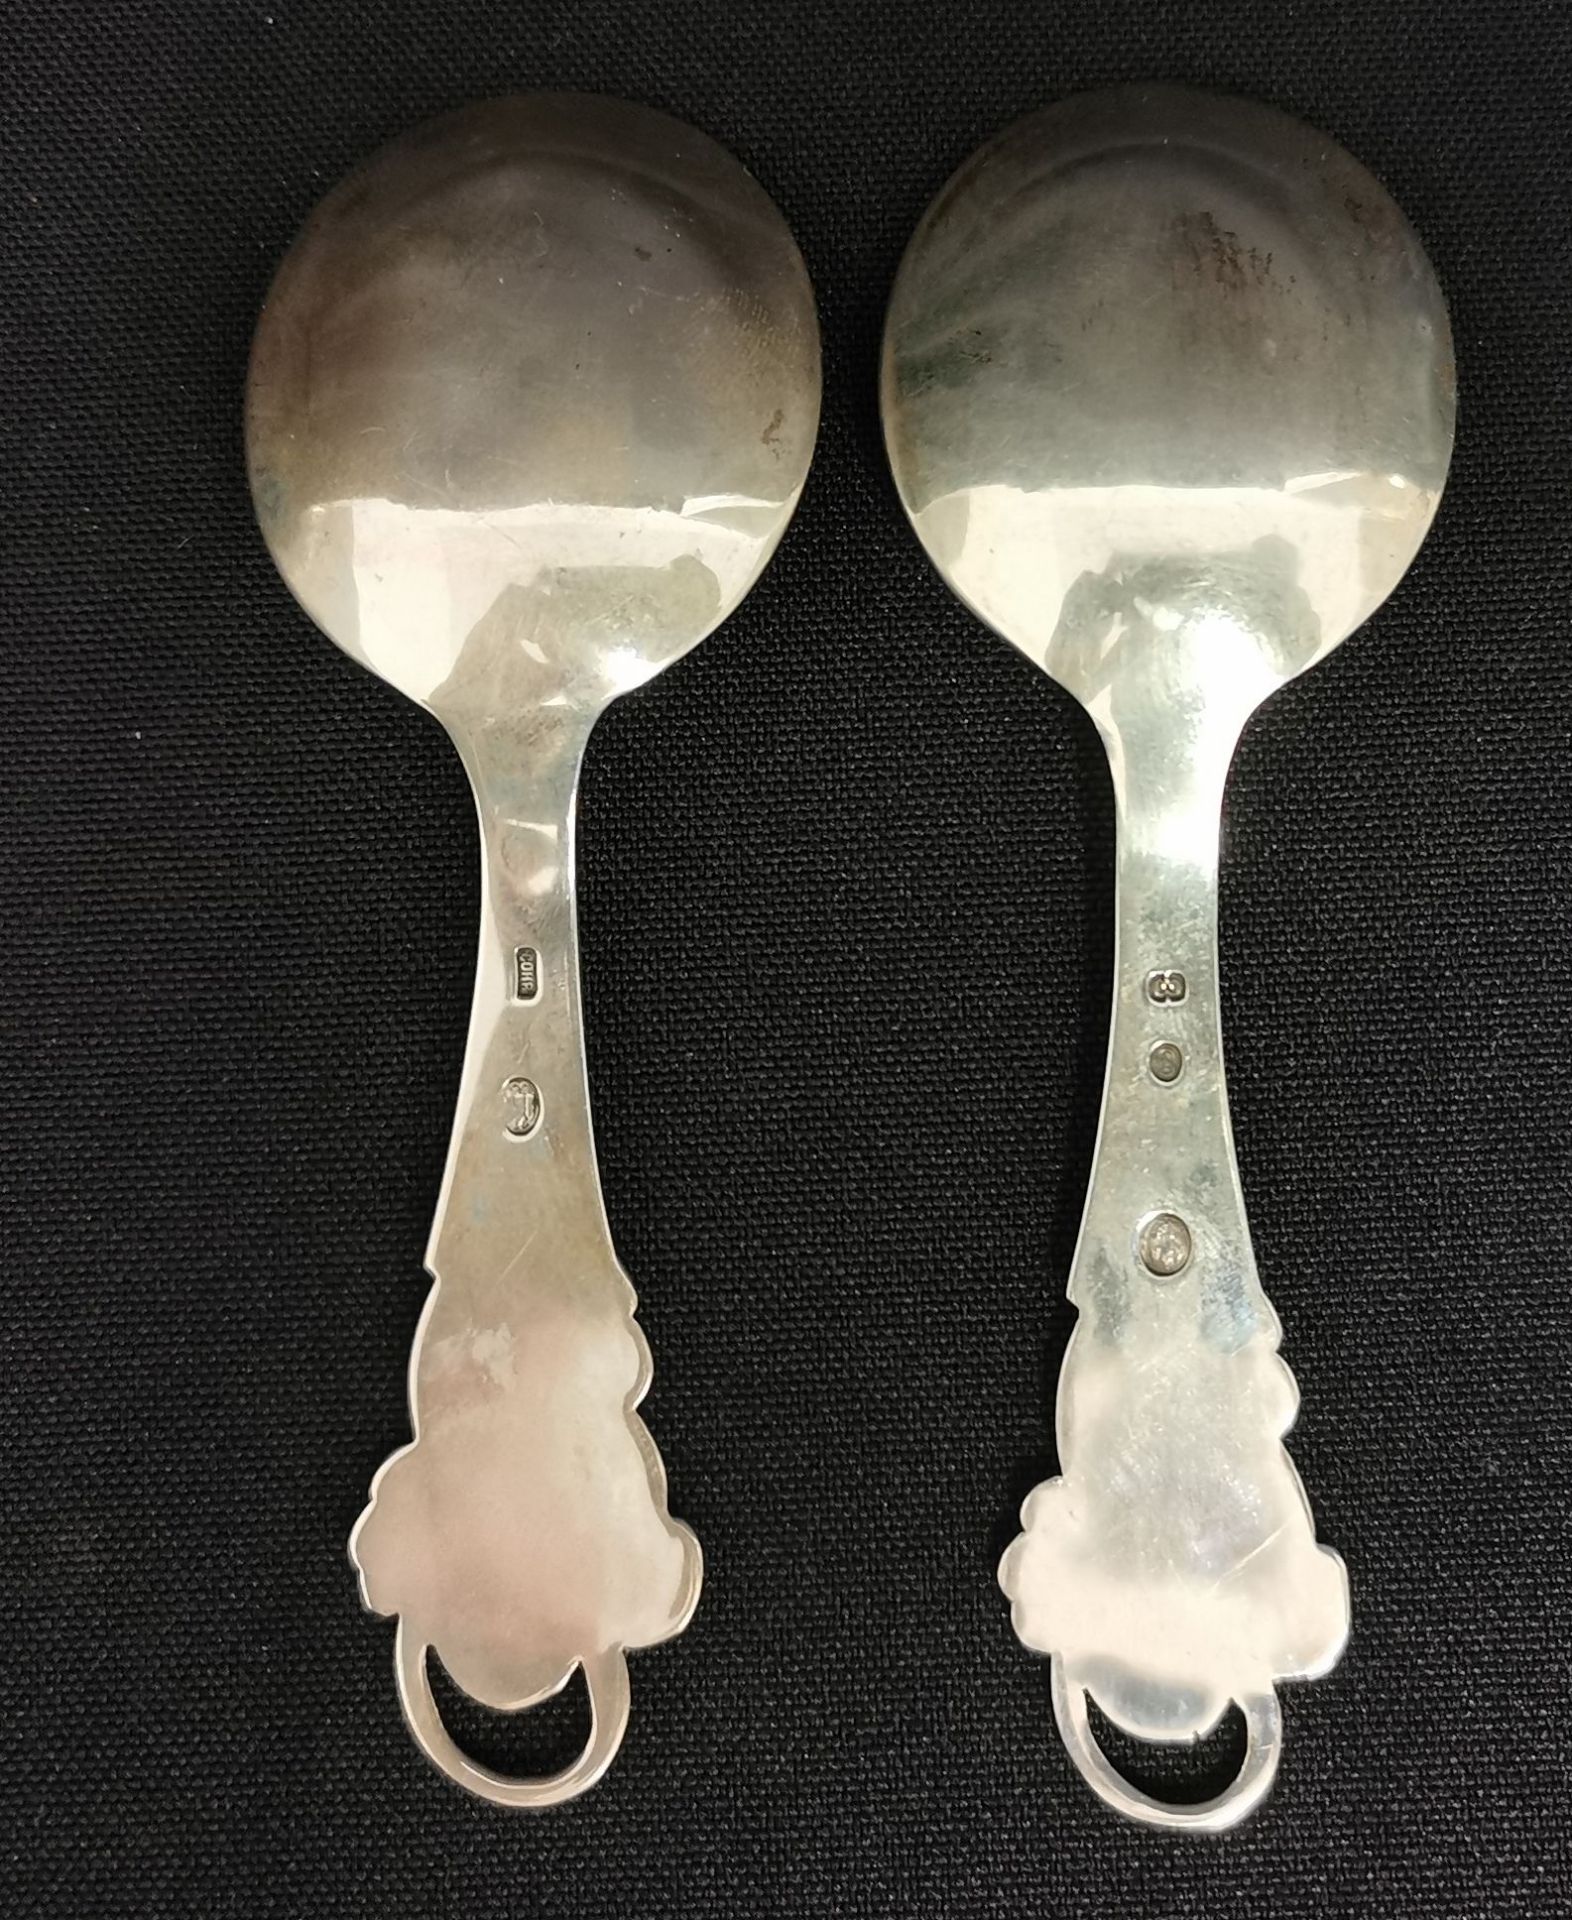 2 SMALL ART DECO SERVING SPOONS - Image 2 of 3